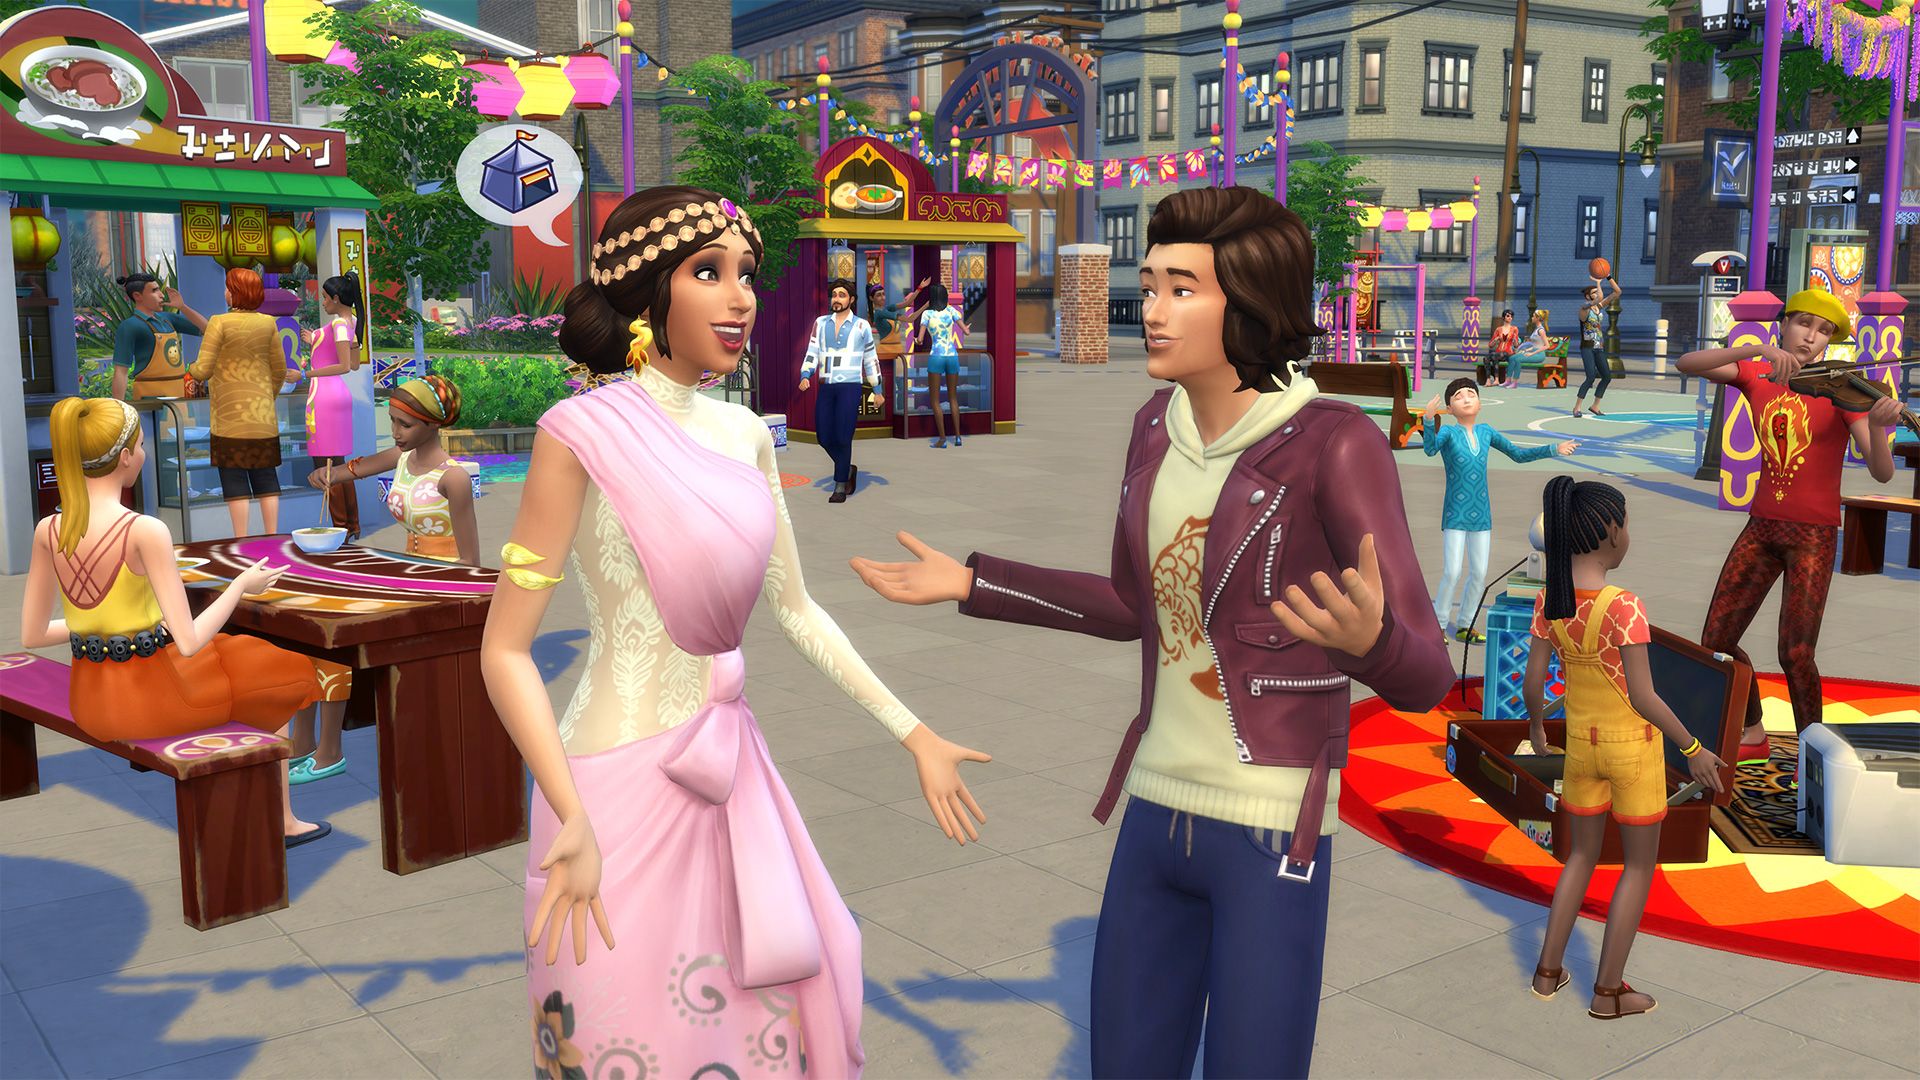 A festival in The Sims 4: City Living